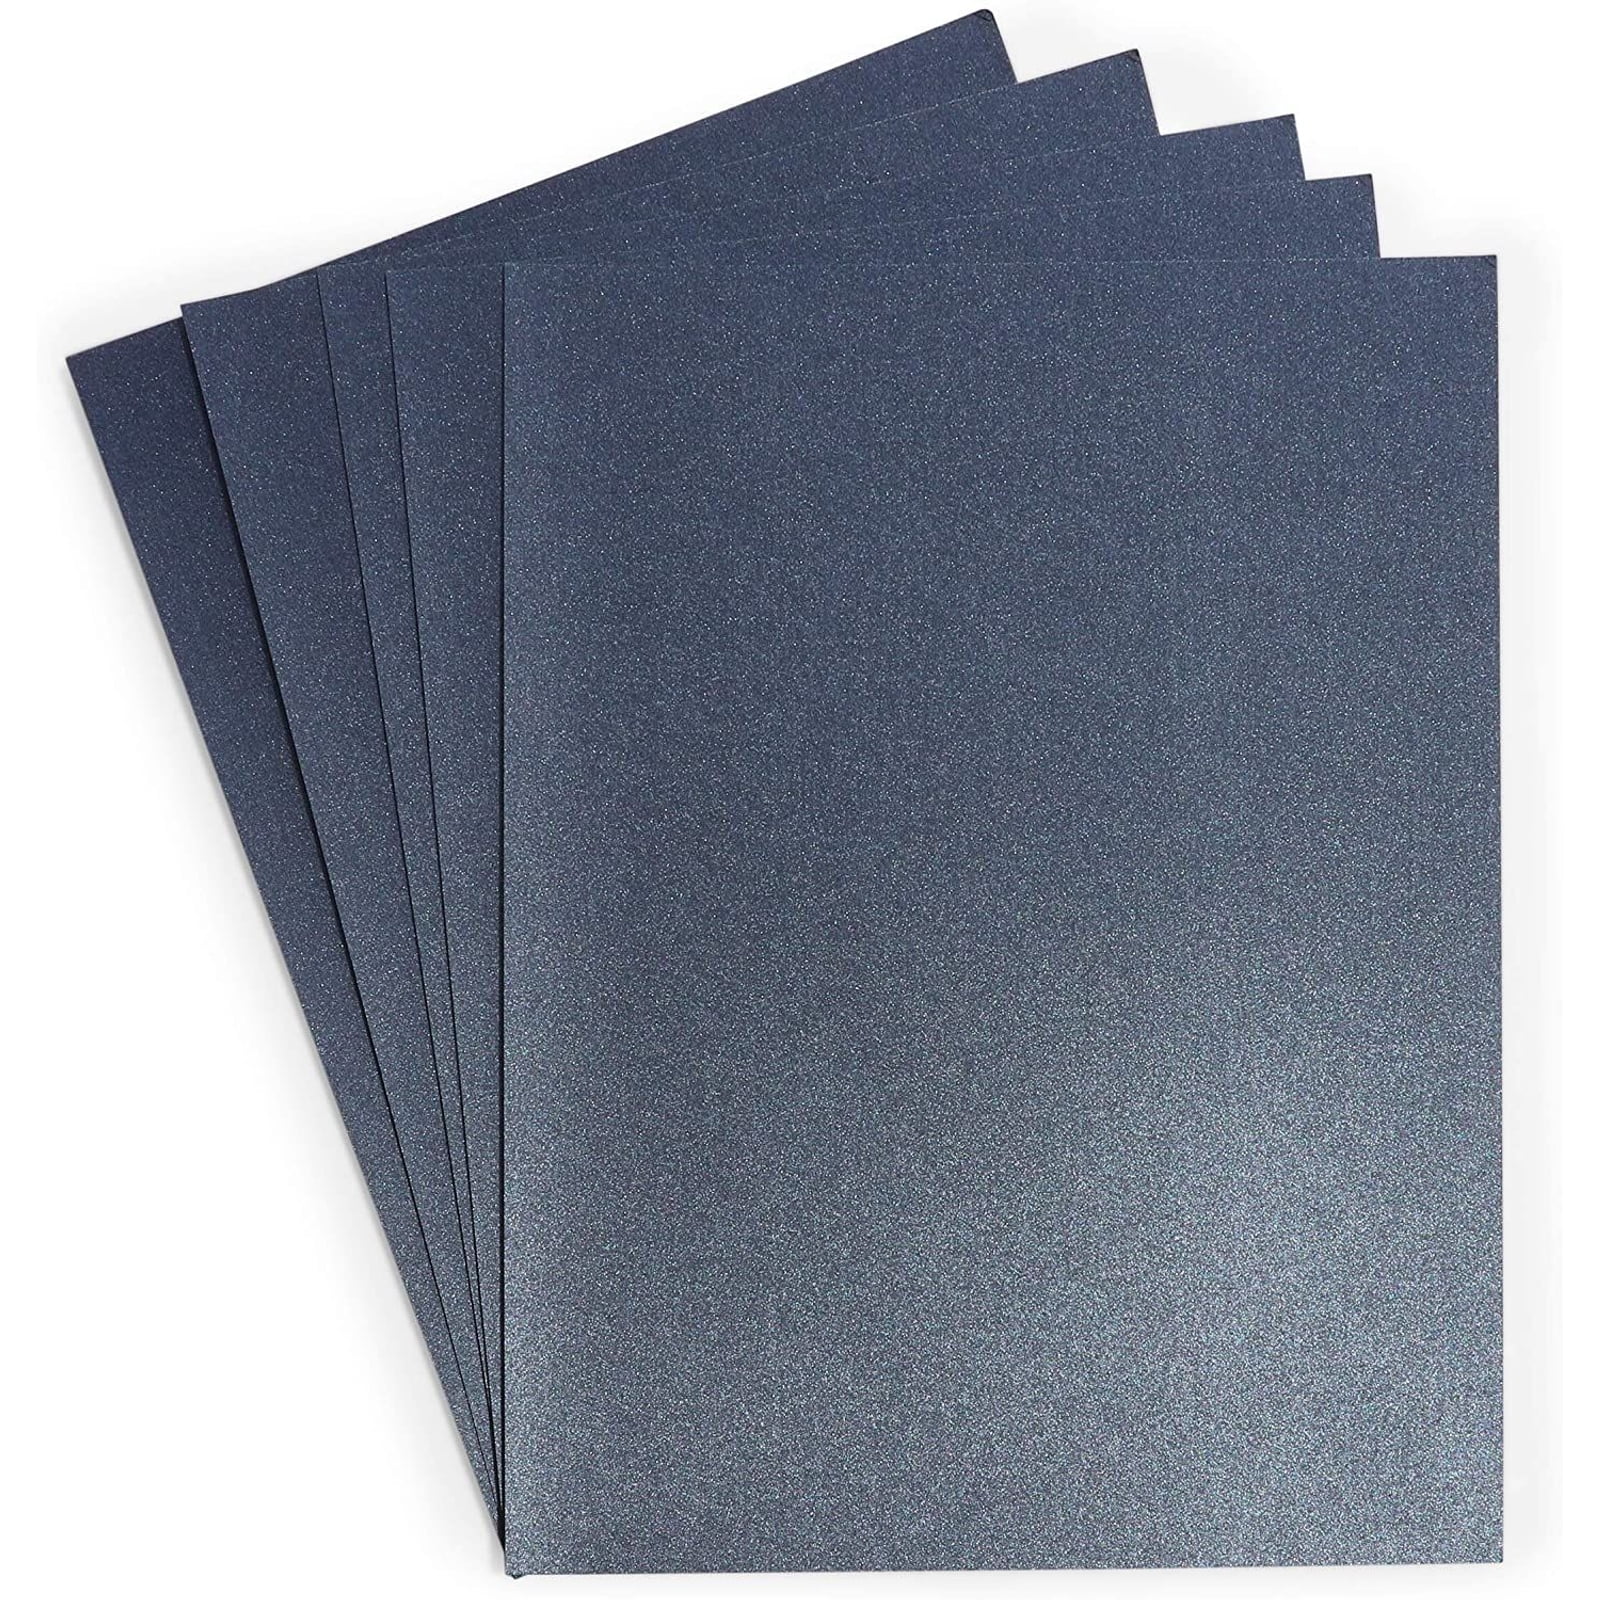 Reflective Metallic Cardstock Paper Sheets (Silver, 8.5 x 11.75 In, 50 Pack)